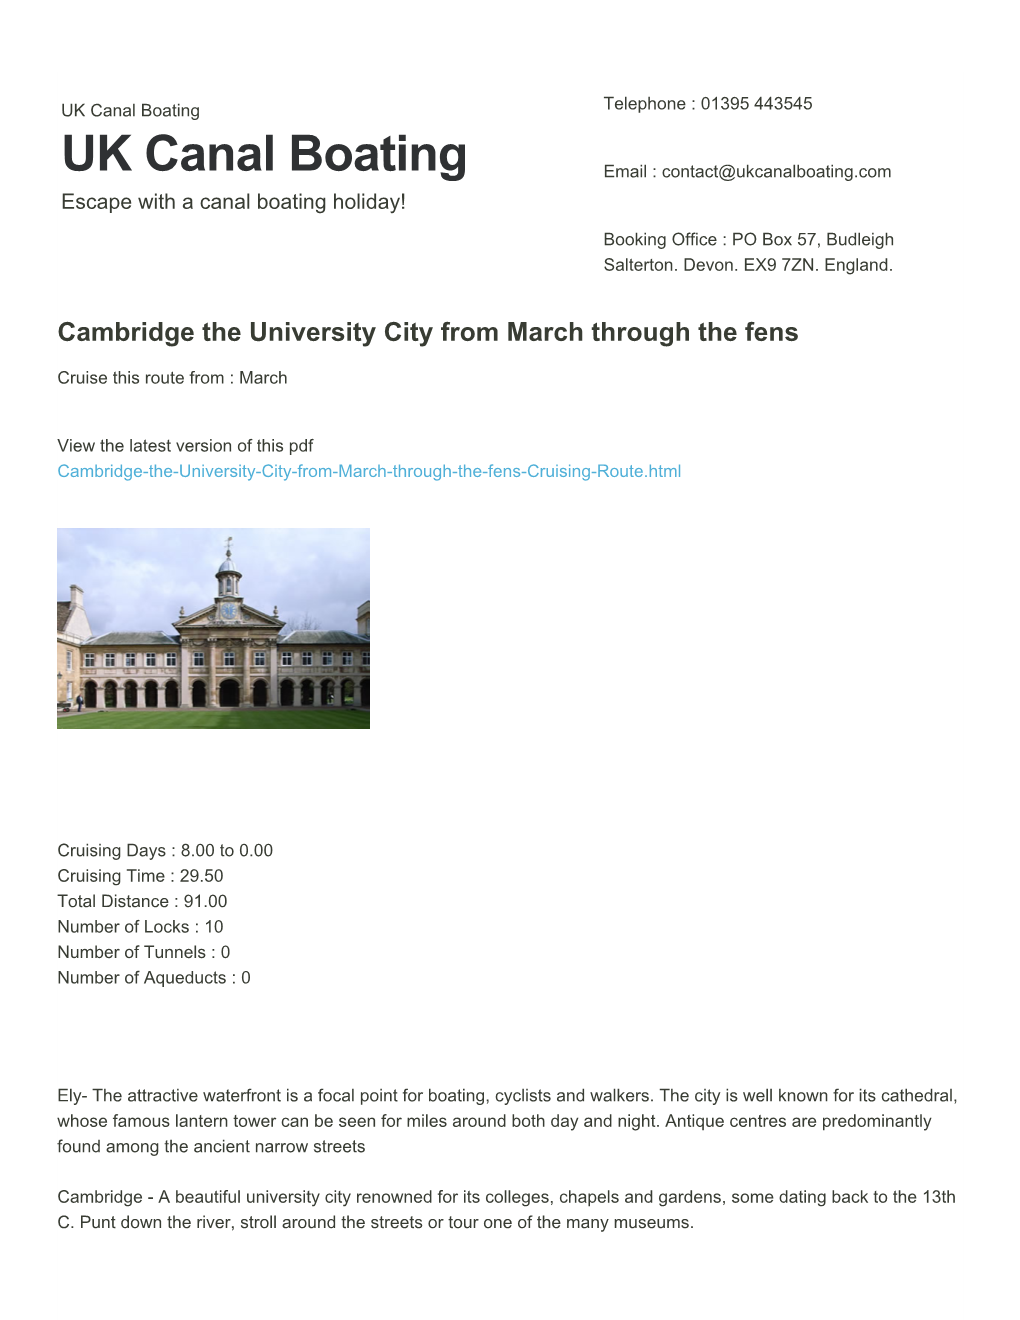 Cambridge the University City from March Through the Fens | UK Canal Boating